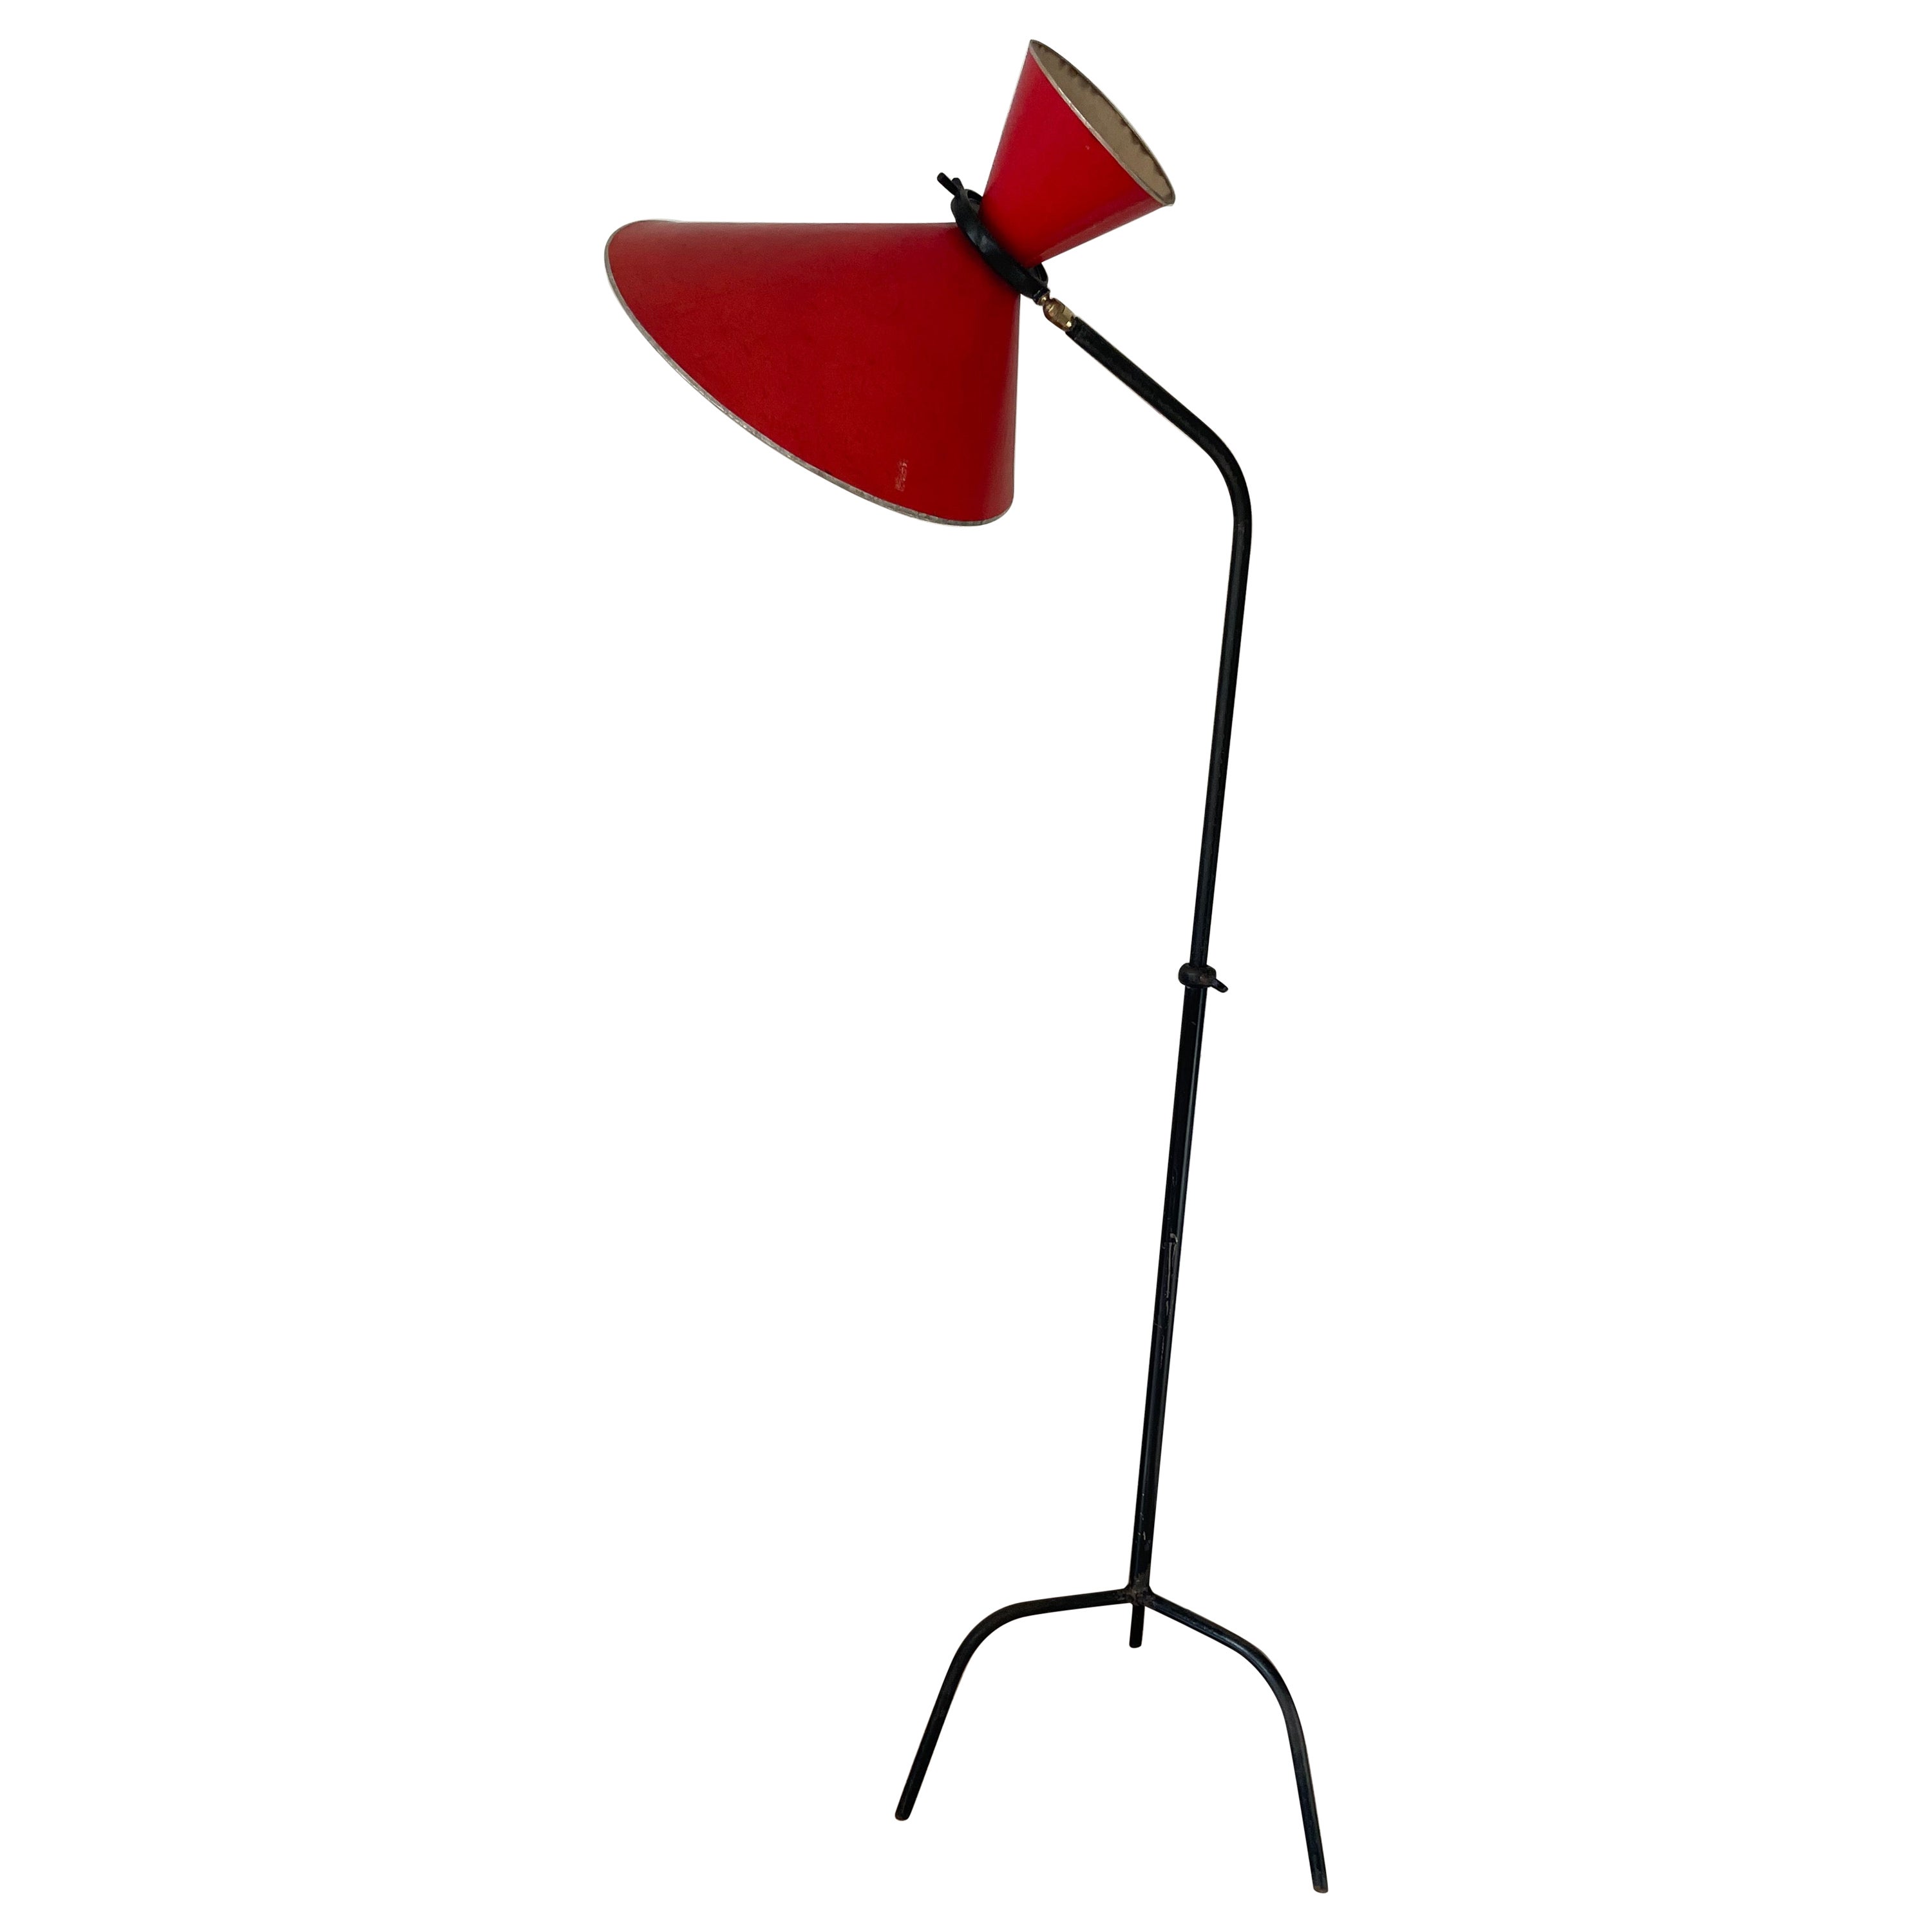 50's Adjustable Floor Lamp With Red Diabolo Shade by Maison Lunel, France 1954.